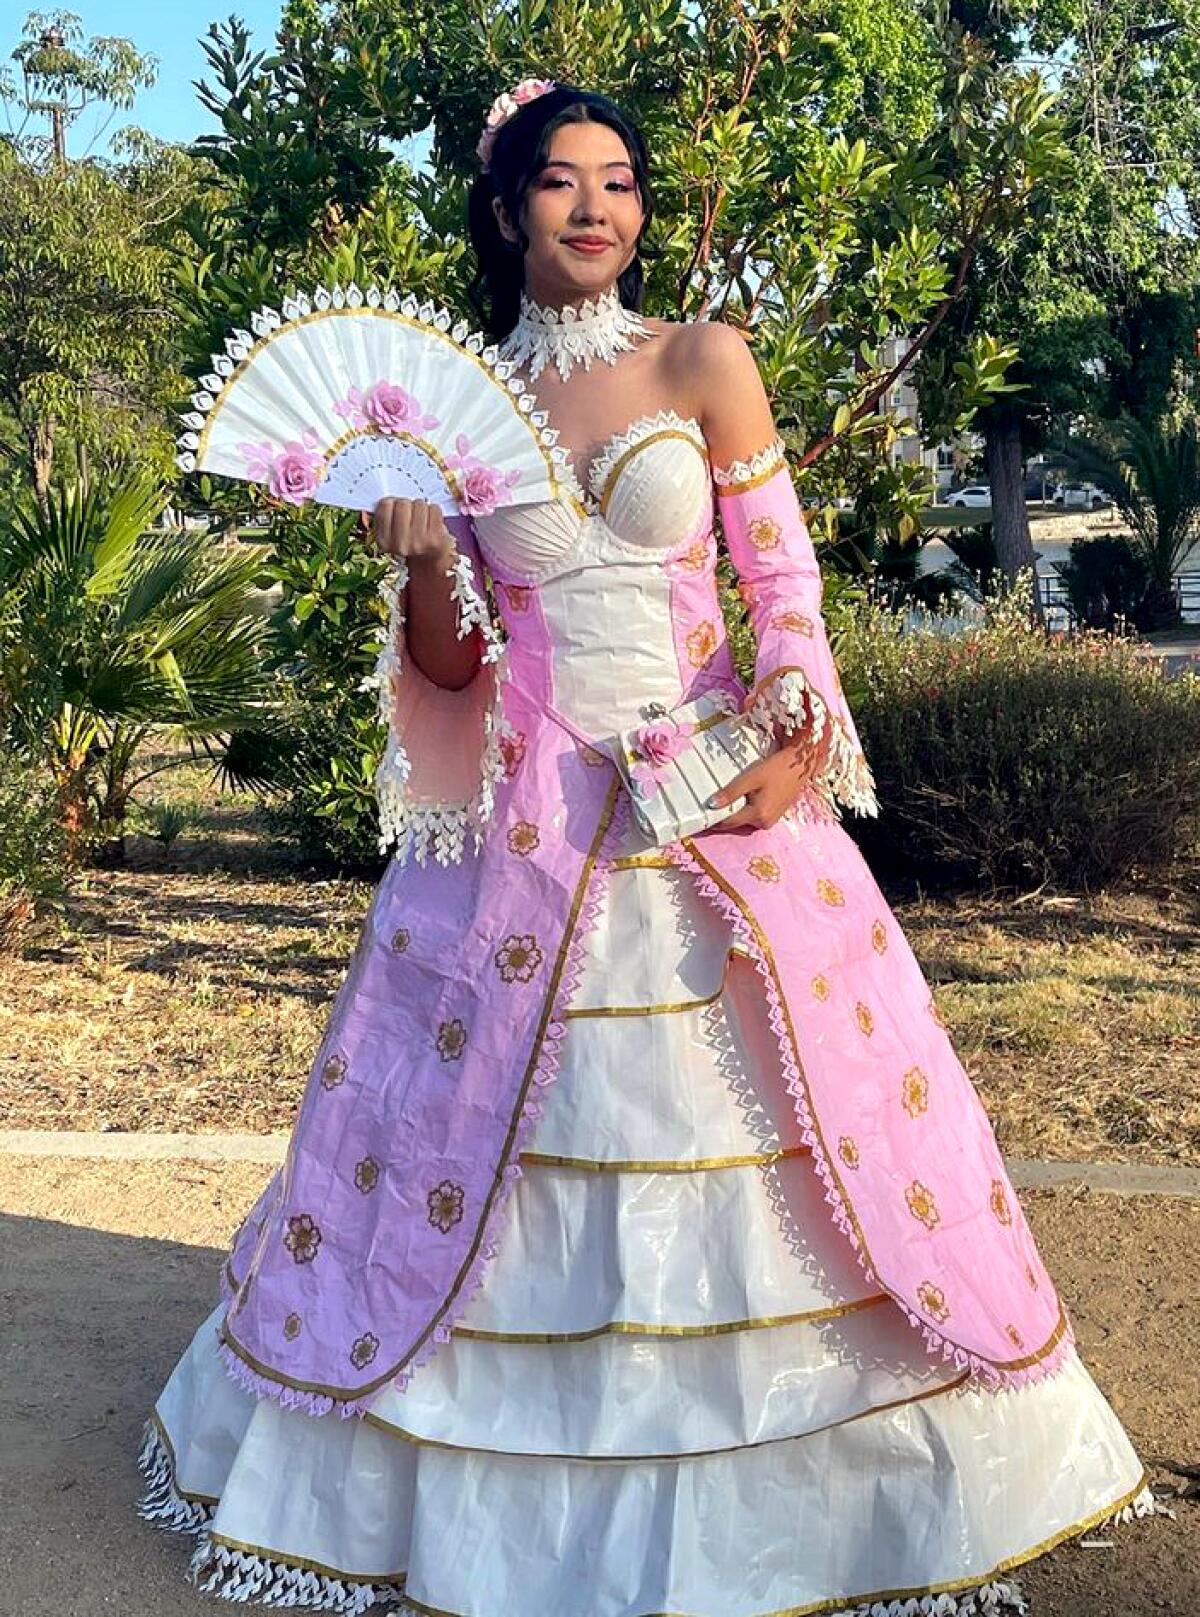 Karla Torres stands in her homemade pink and white duct tape prom dress. She holds a fan and wears a matching white choker.